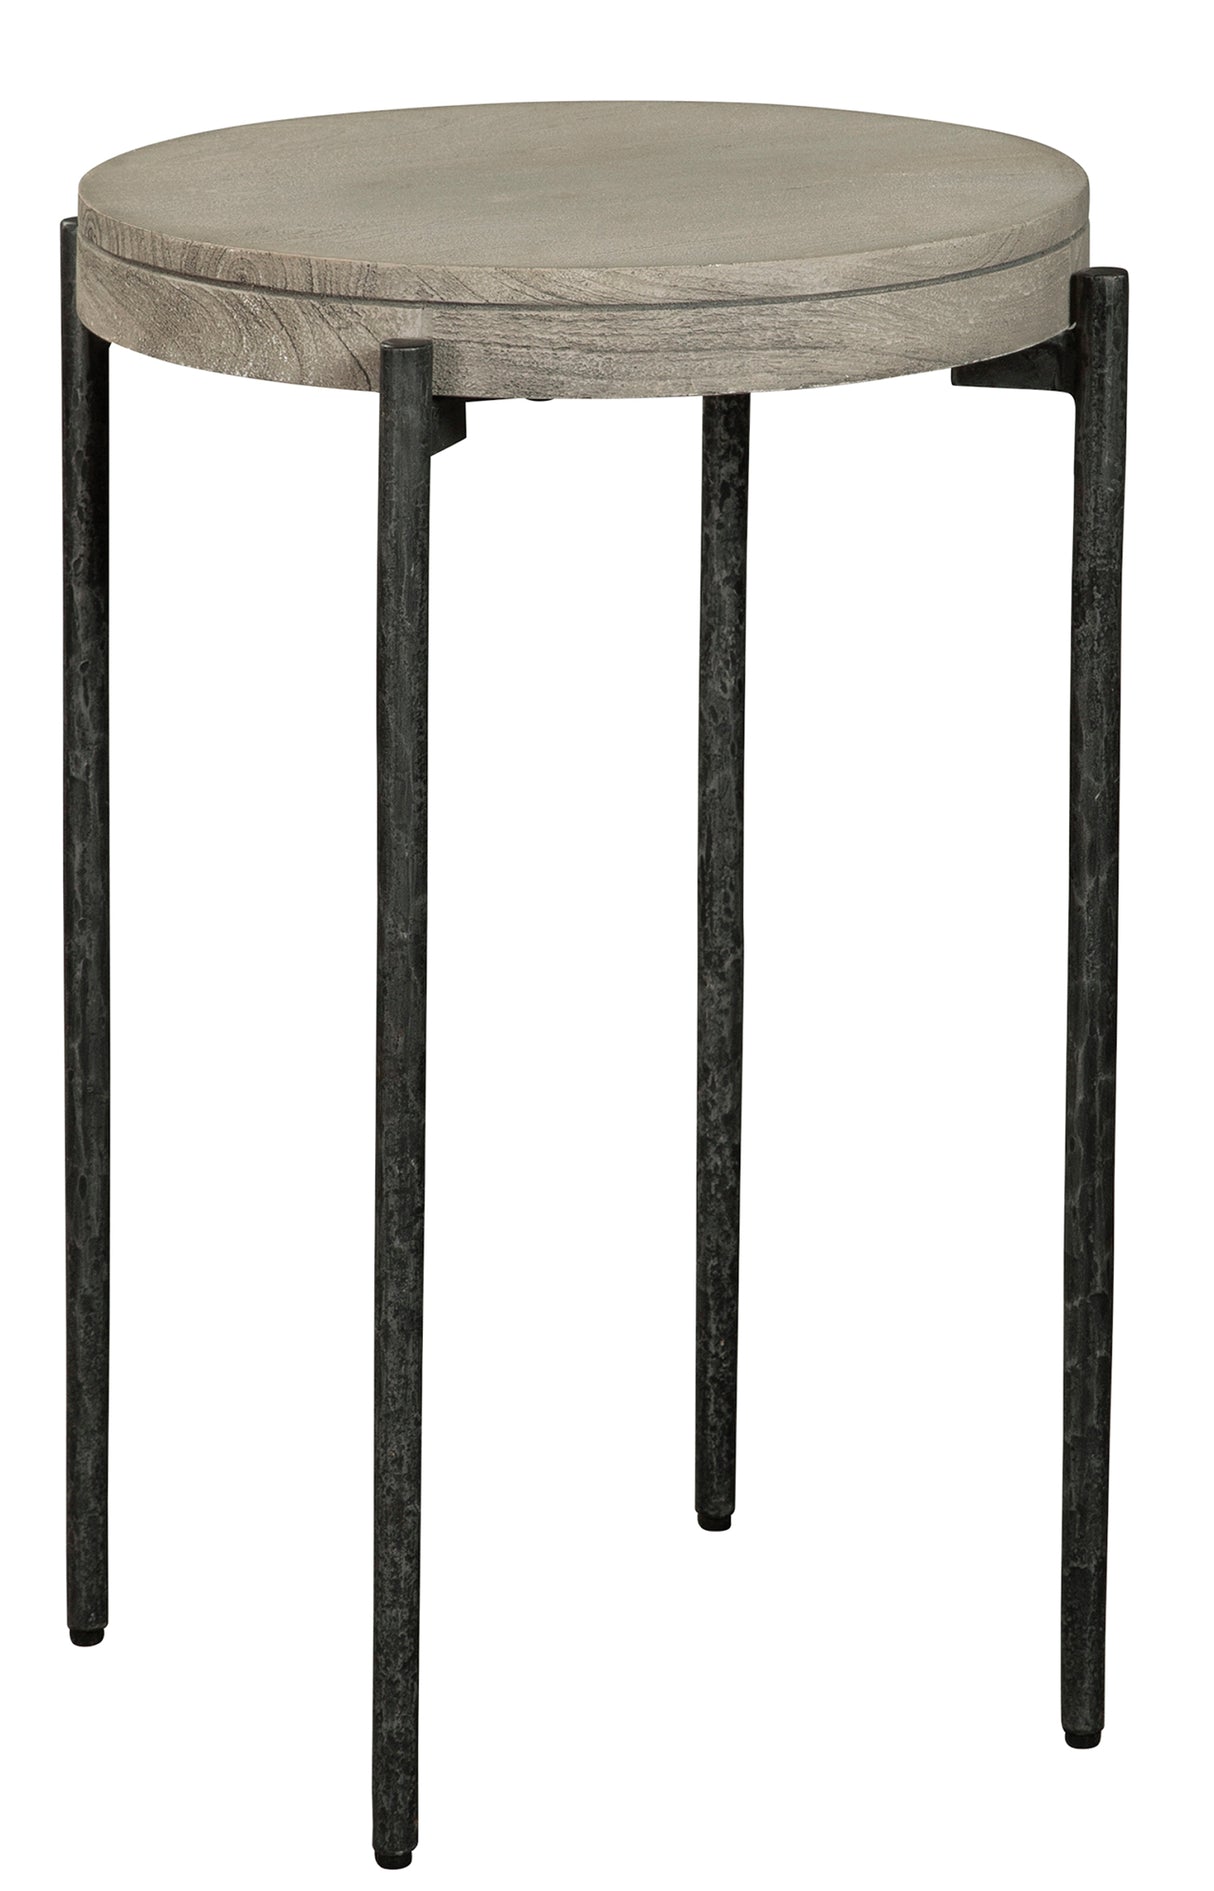 Hekman 24907 Bedford Park 17.75in. x 17.75in. x 25.25in. End Table